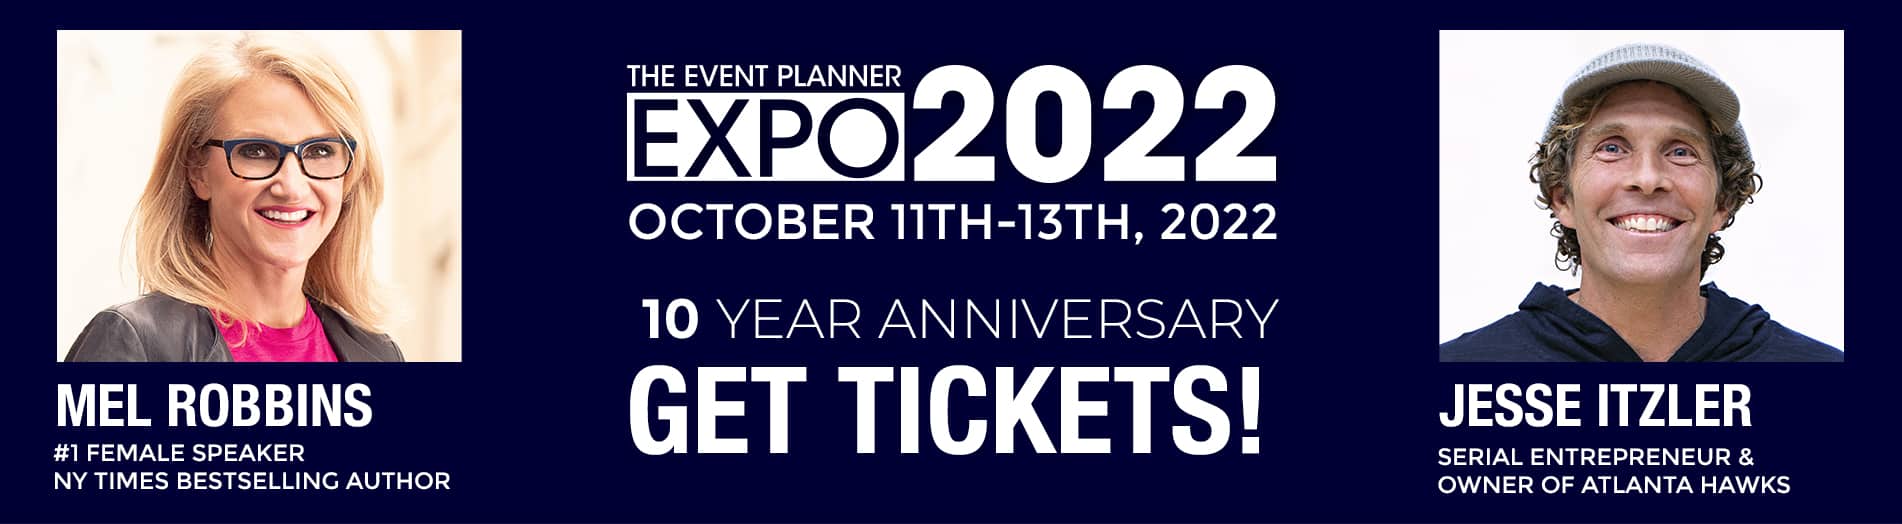 EXPO2022-Home_VideoTickets3-banner